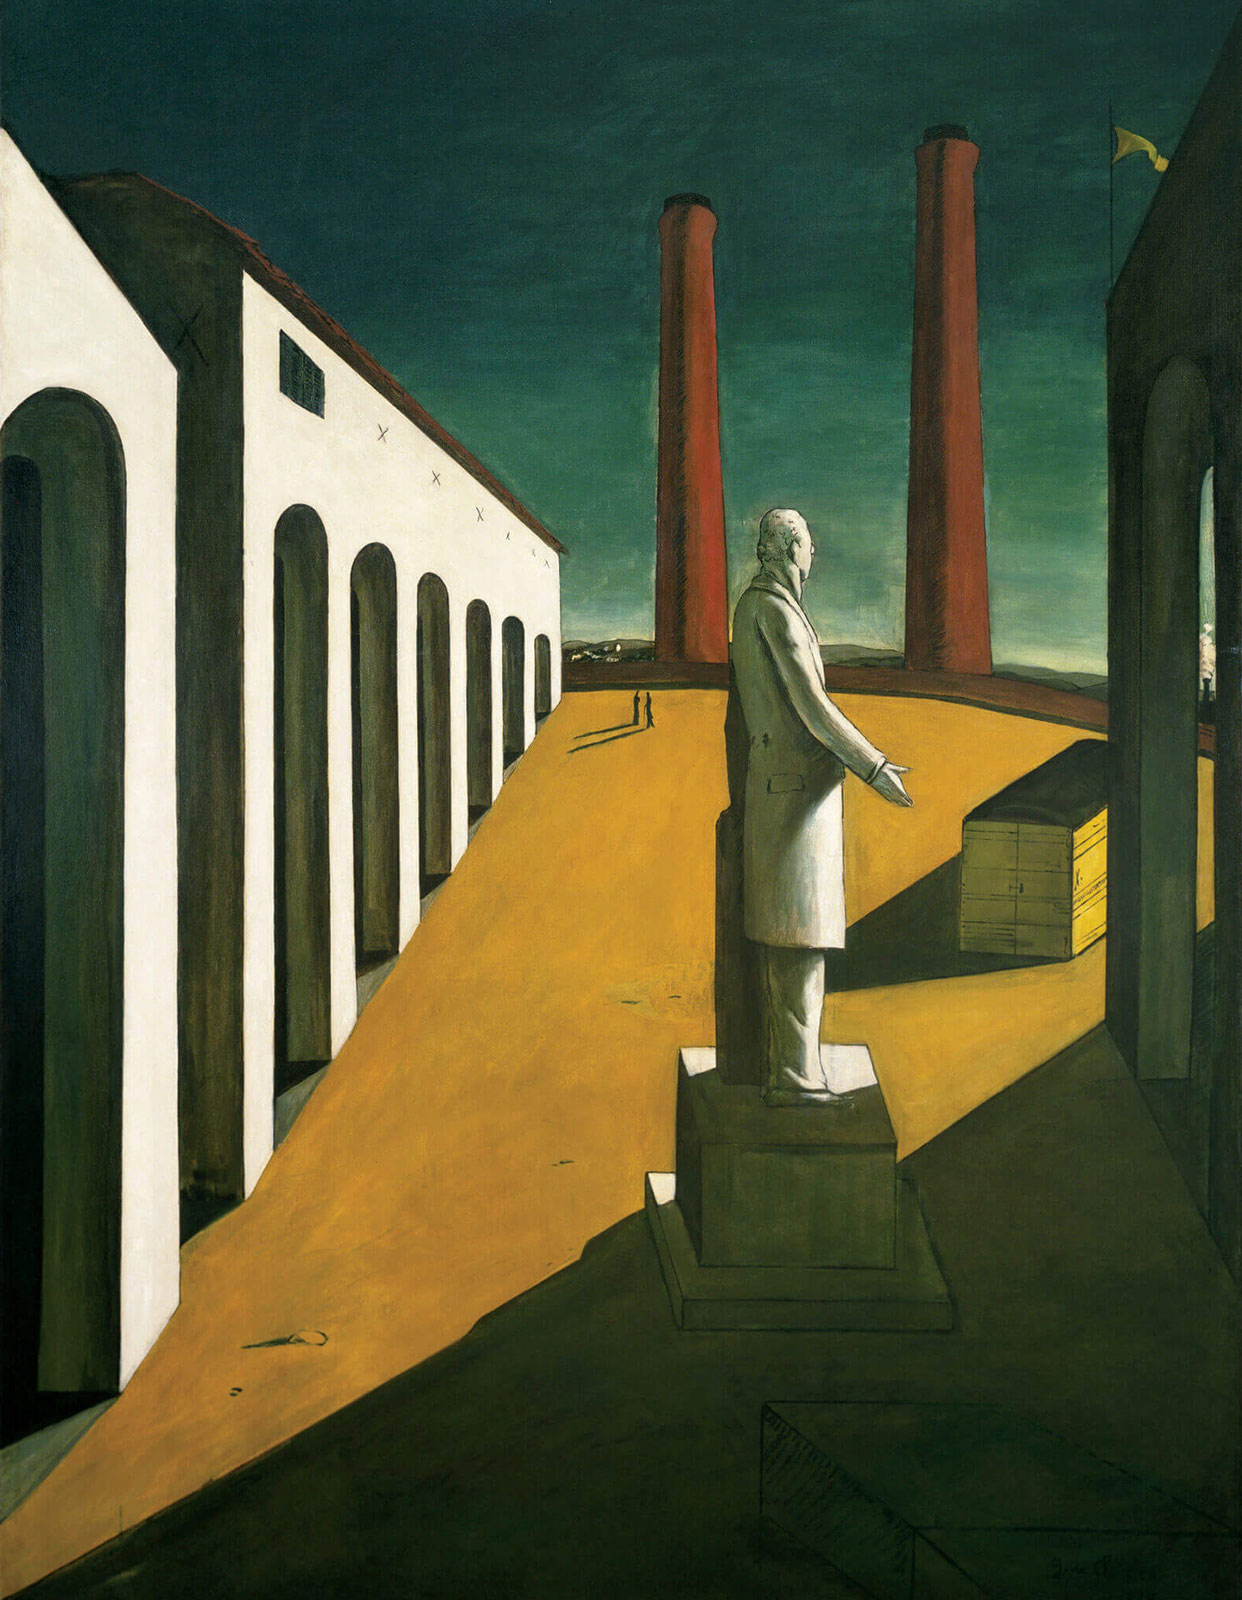 Giorgio de Chirico’s nineteen fourteen oil painting entitled “The Enigma of a Day”